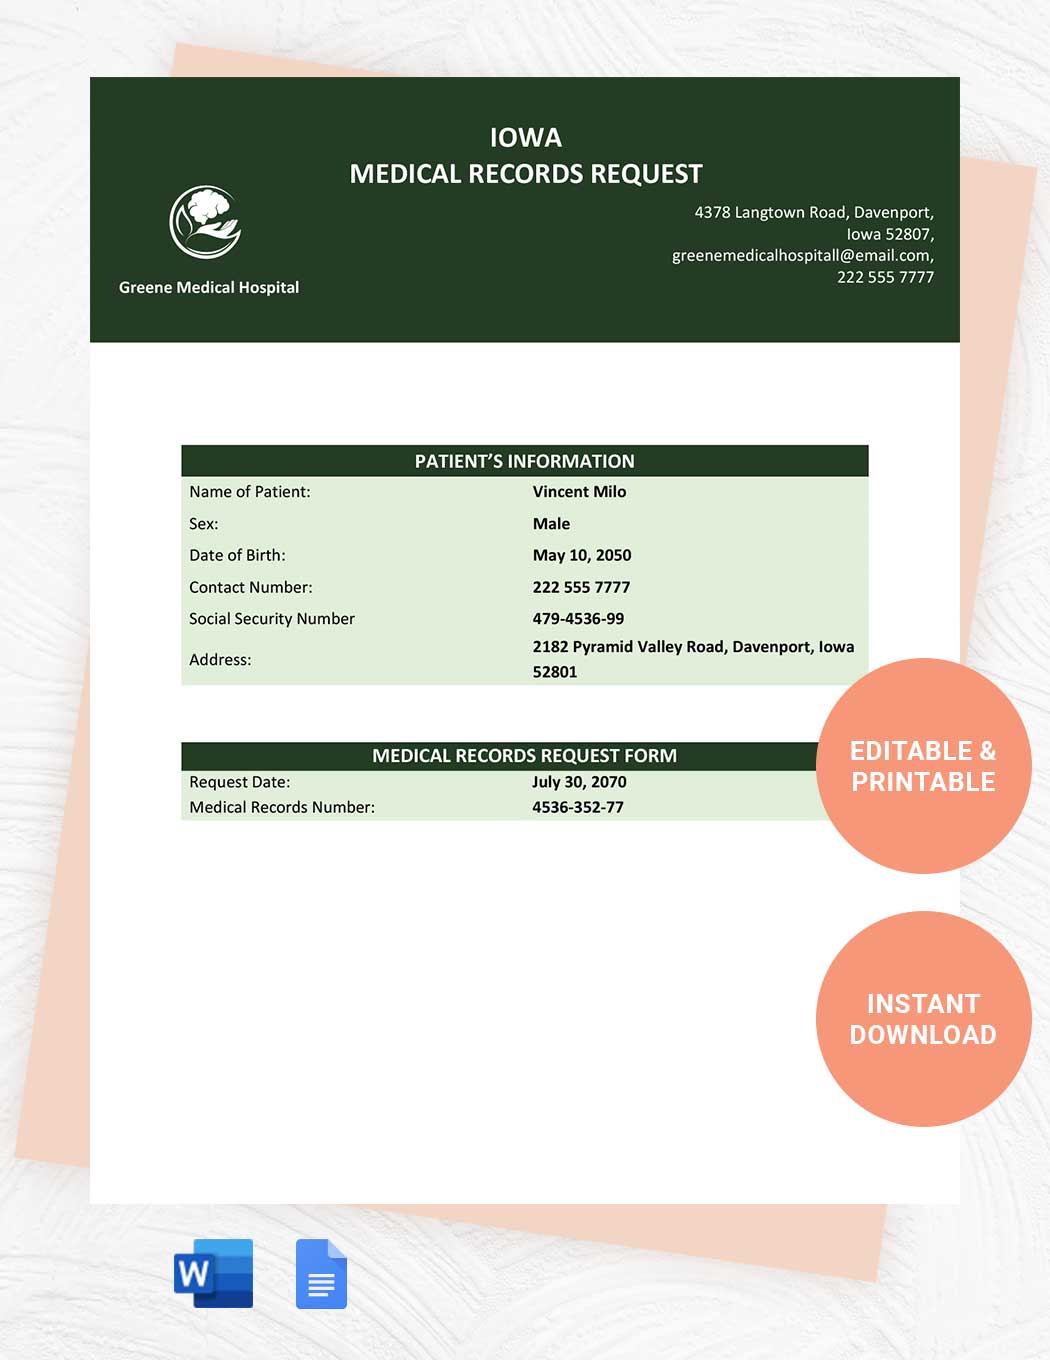 Iowa Medical Records Request Template in Word, Google Docs